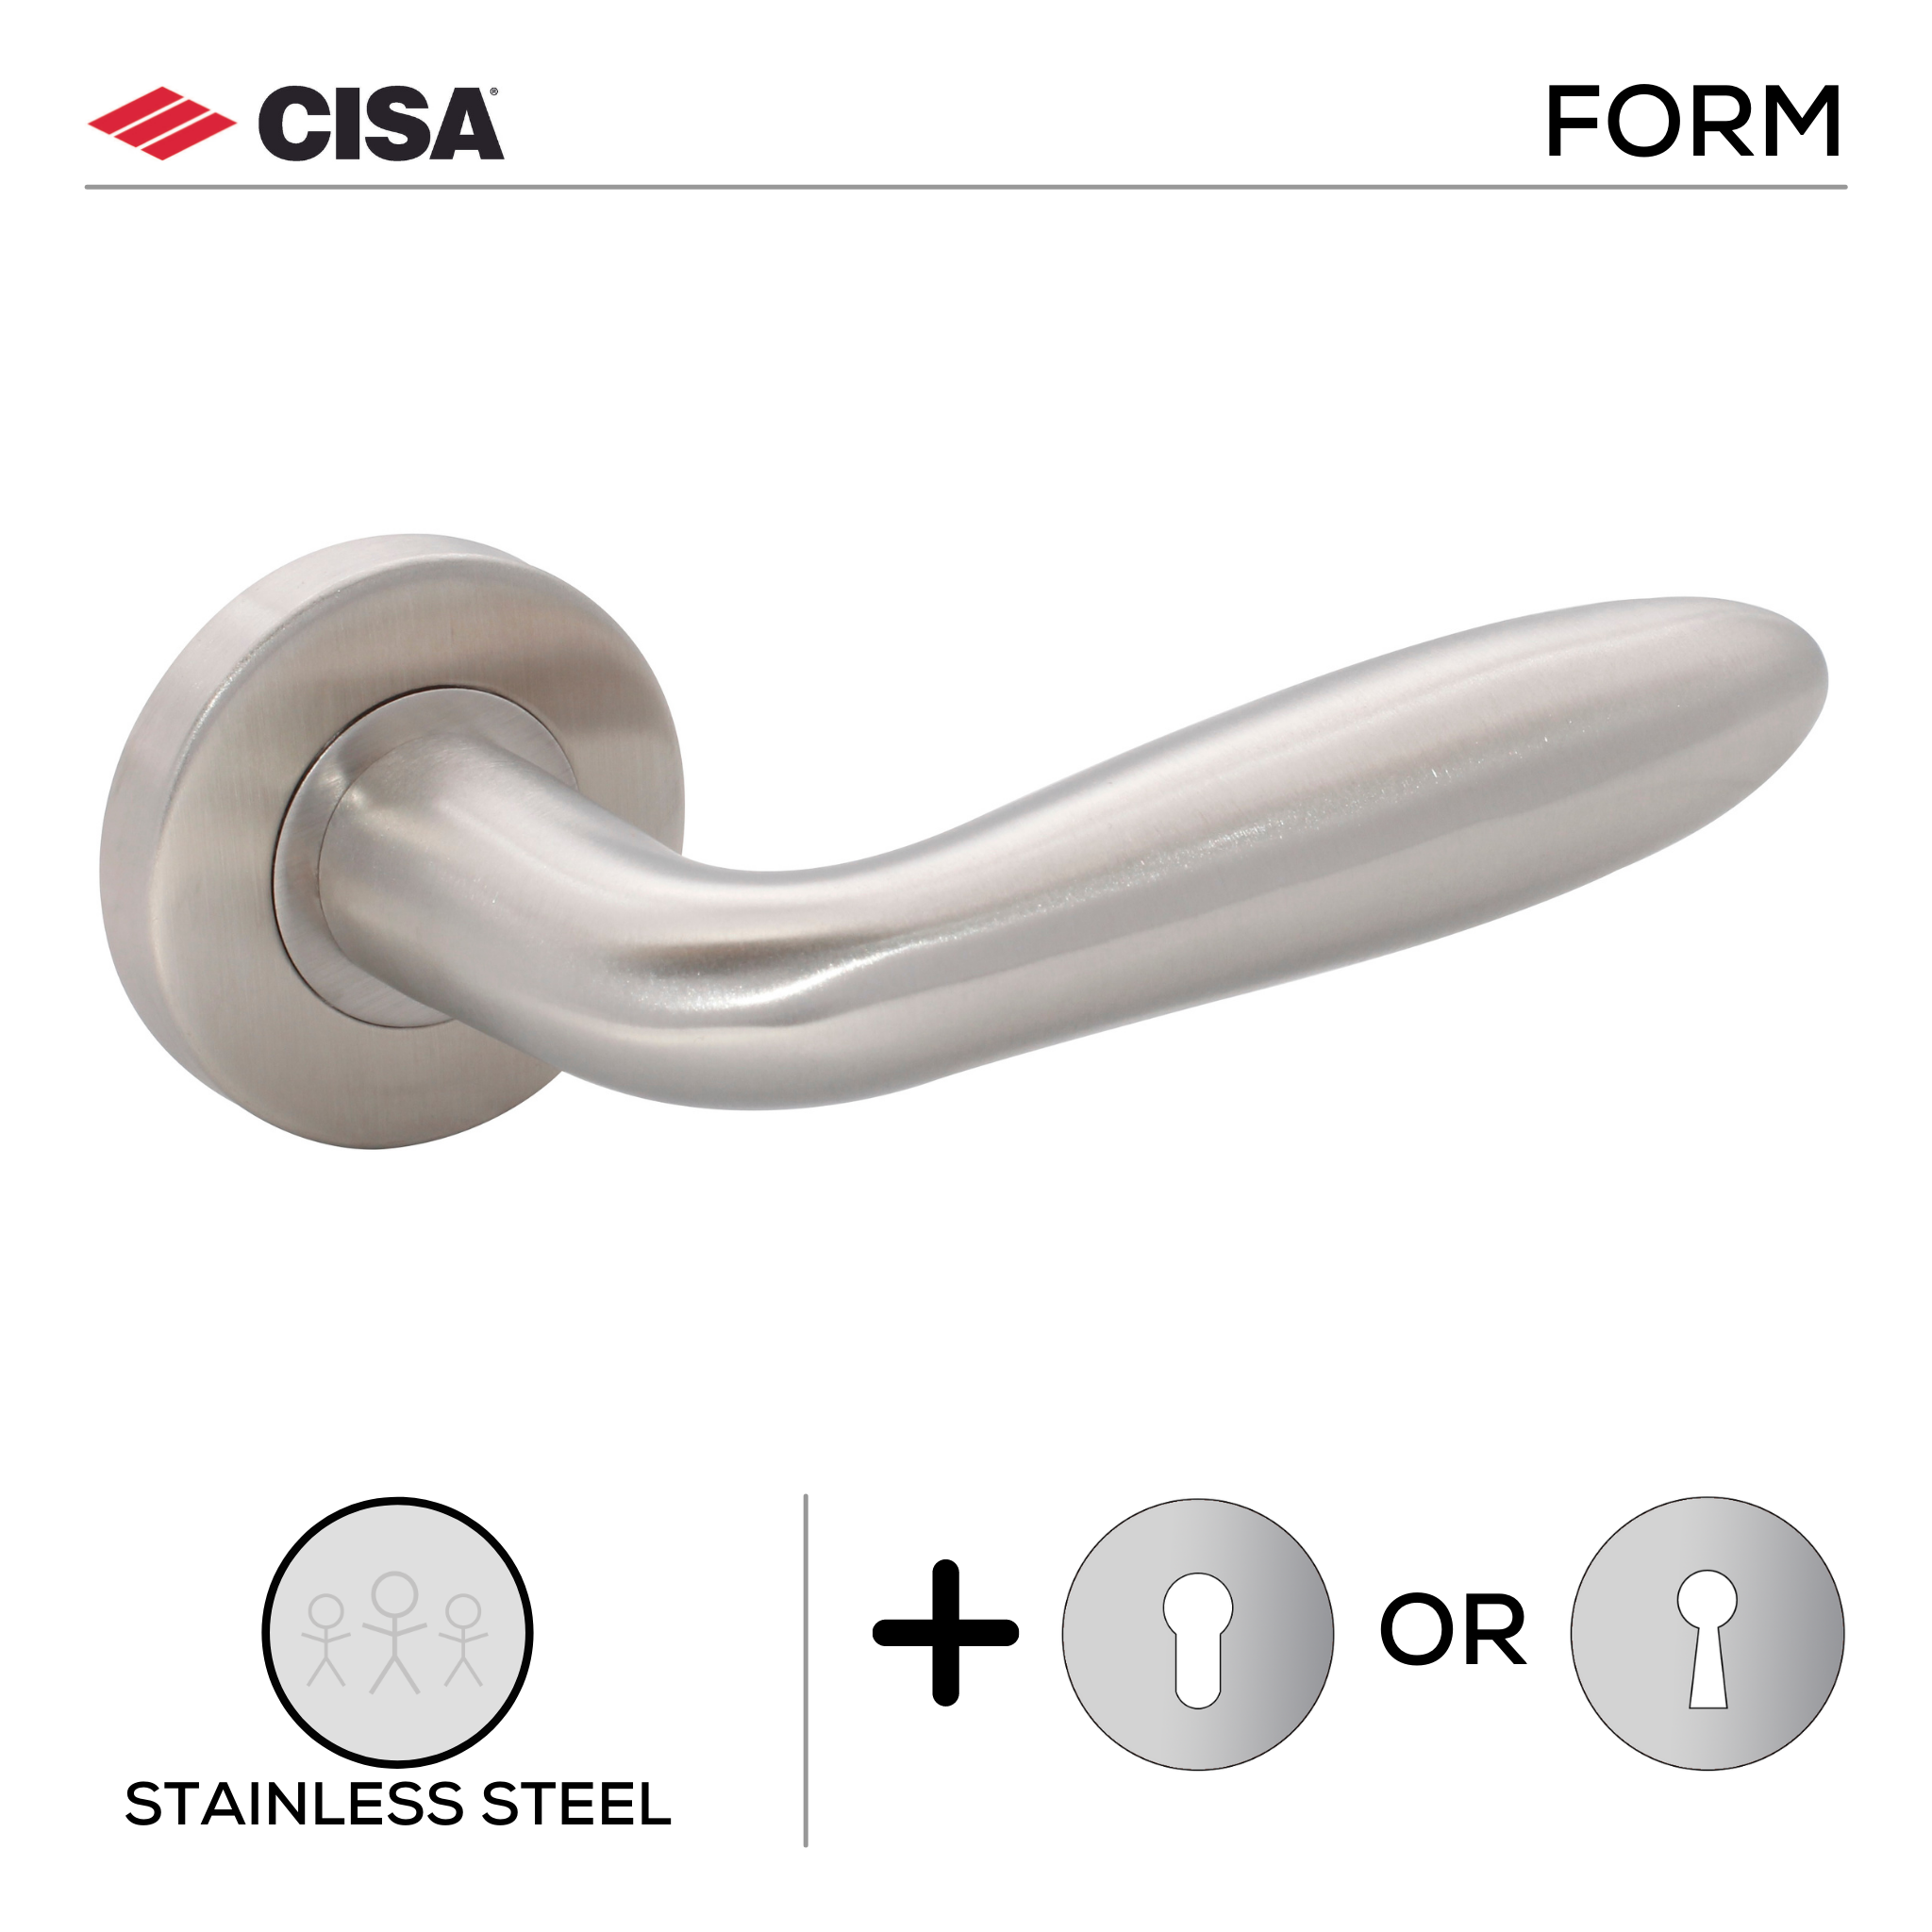 FS112.R._.SS, Lever Handles, Form, On Round Rose, With Escutcheons, Stainless Steel, CISA